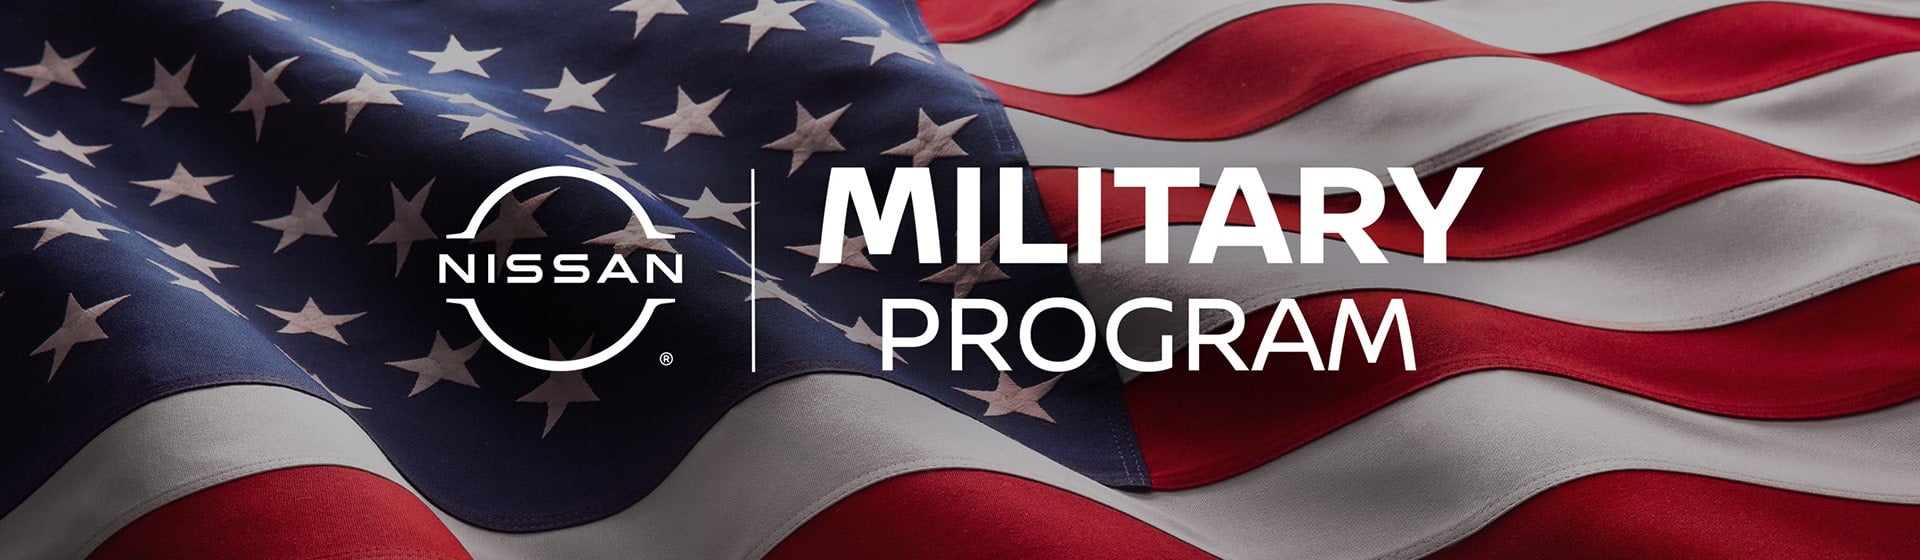 Nissan Military Discount | Coral Springs Nissan in Coral Springs FL